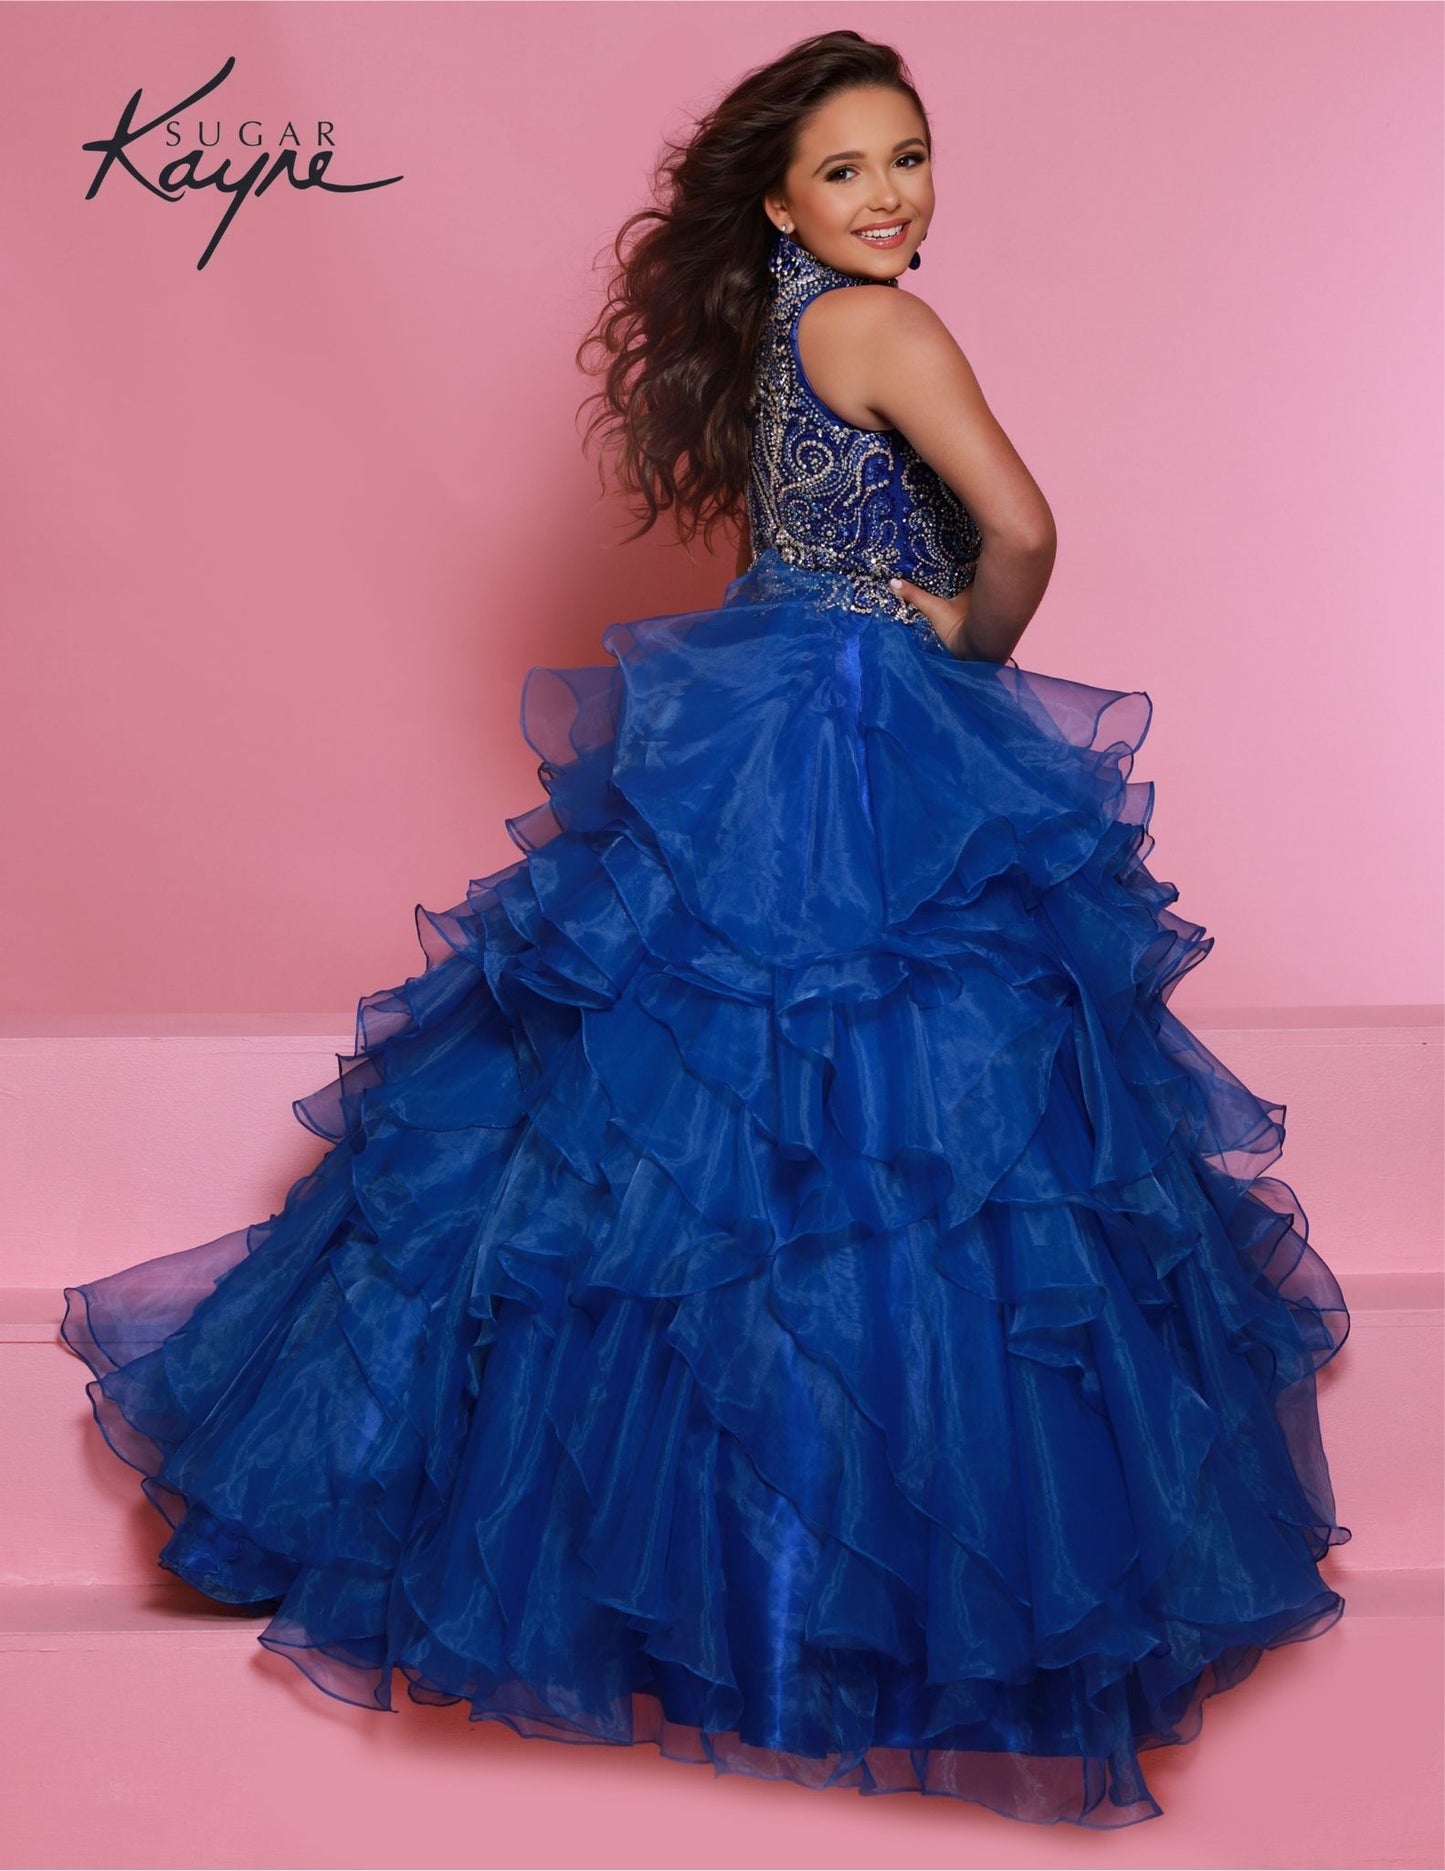 Sugar Kayne C326 royal blue is the perfect pageant dress for young girls and preteens, featuring a ruffled long skirt, high neckline, and crystal bodice with sleeveless design.